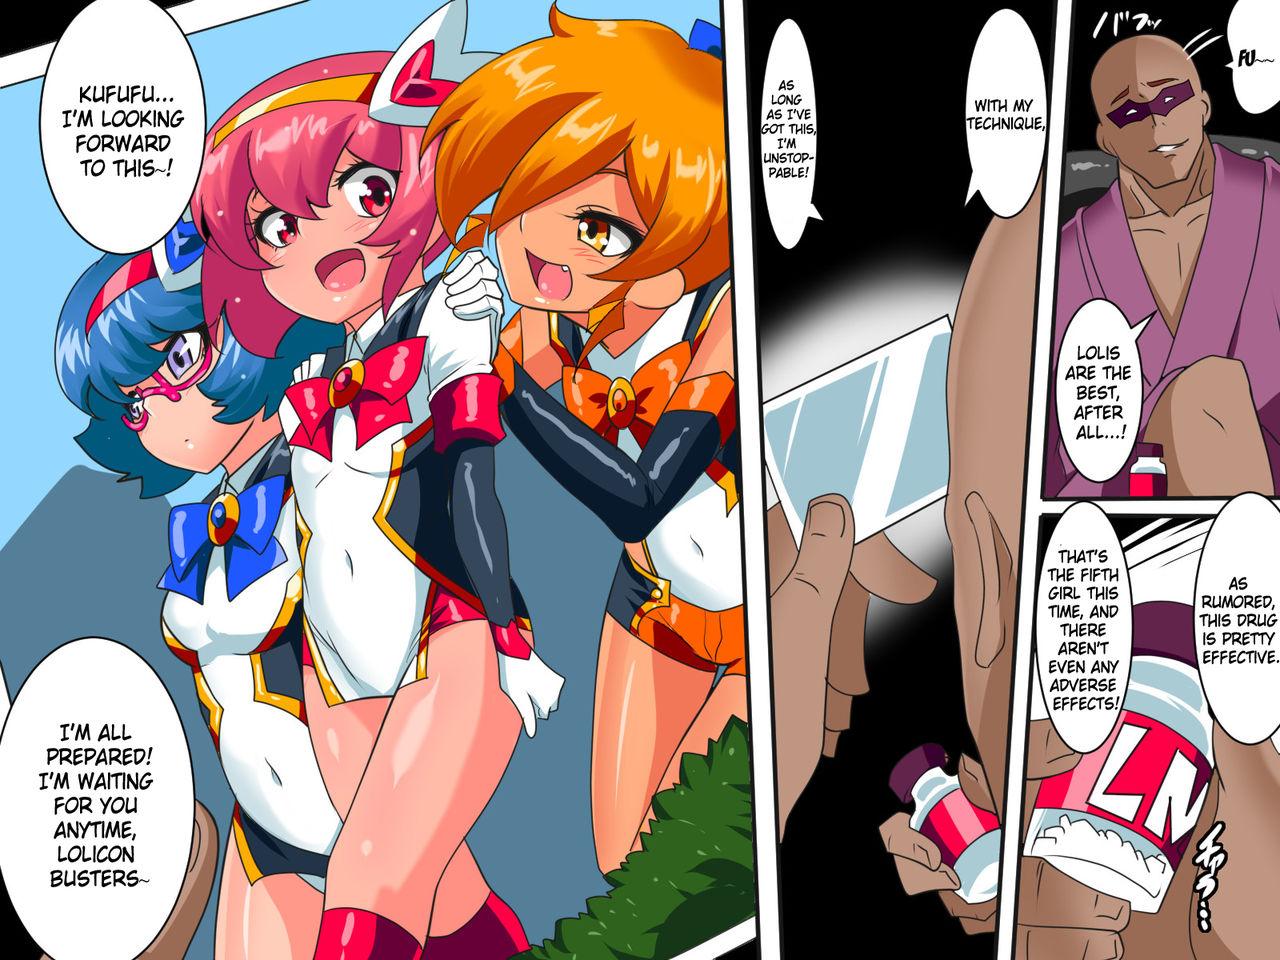 Beauty Lolicon Busters!! VS Hentai Massage-shi! Mmf - Page 4